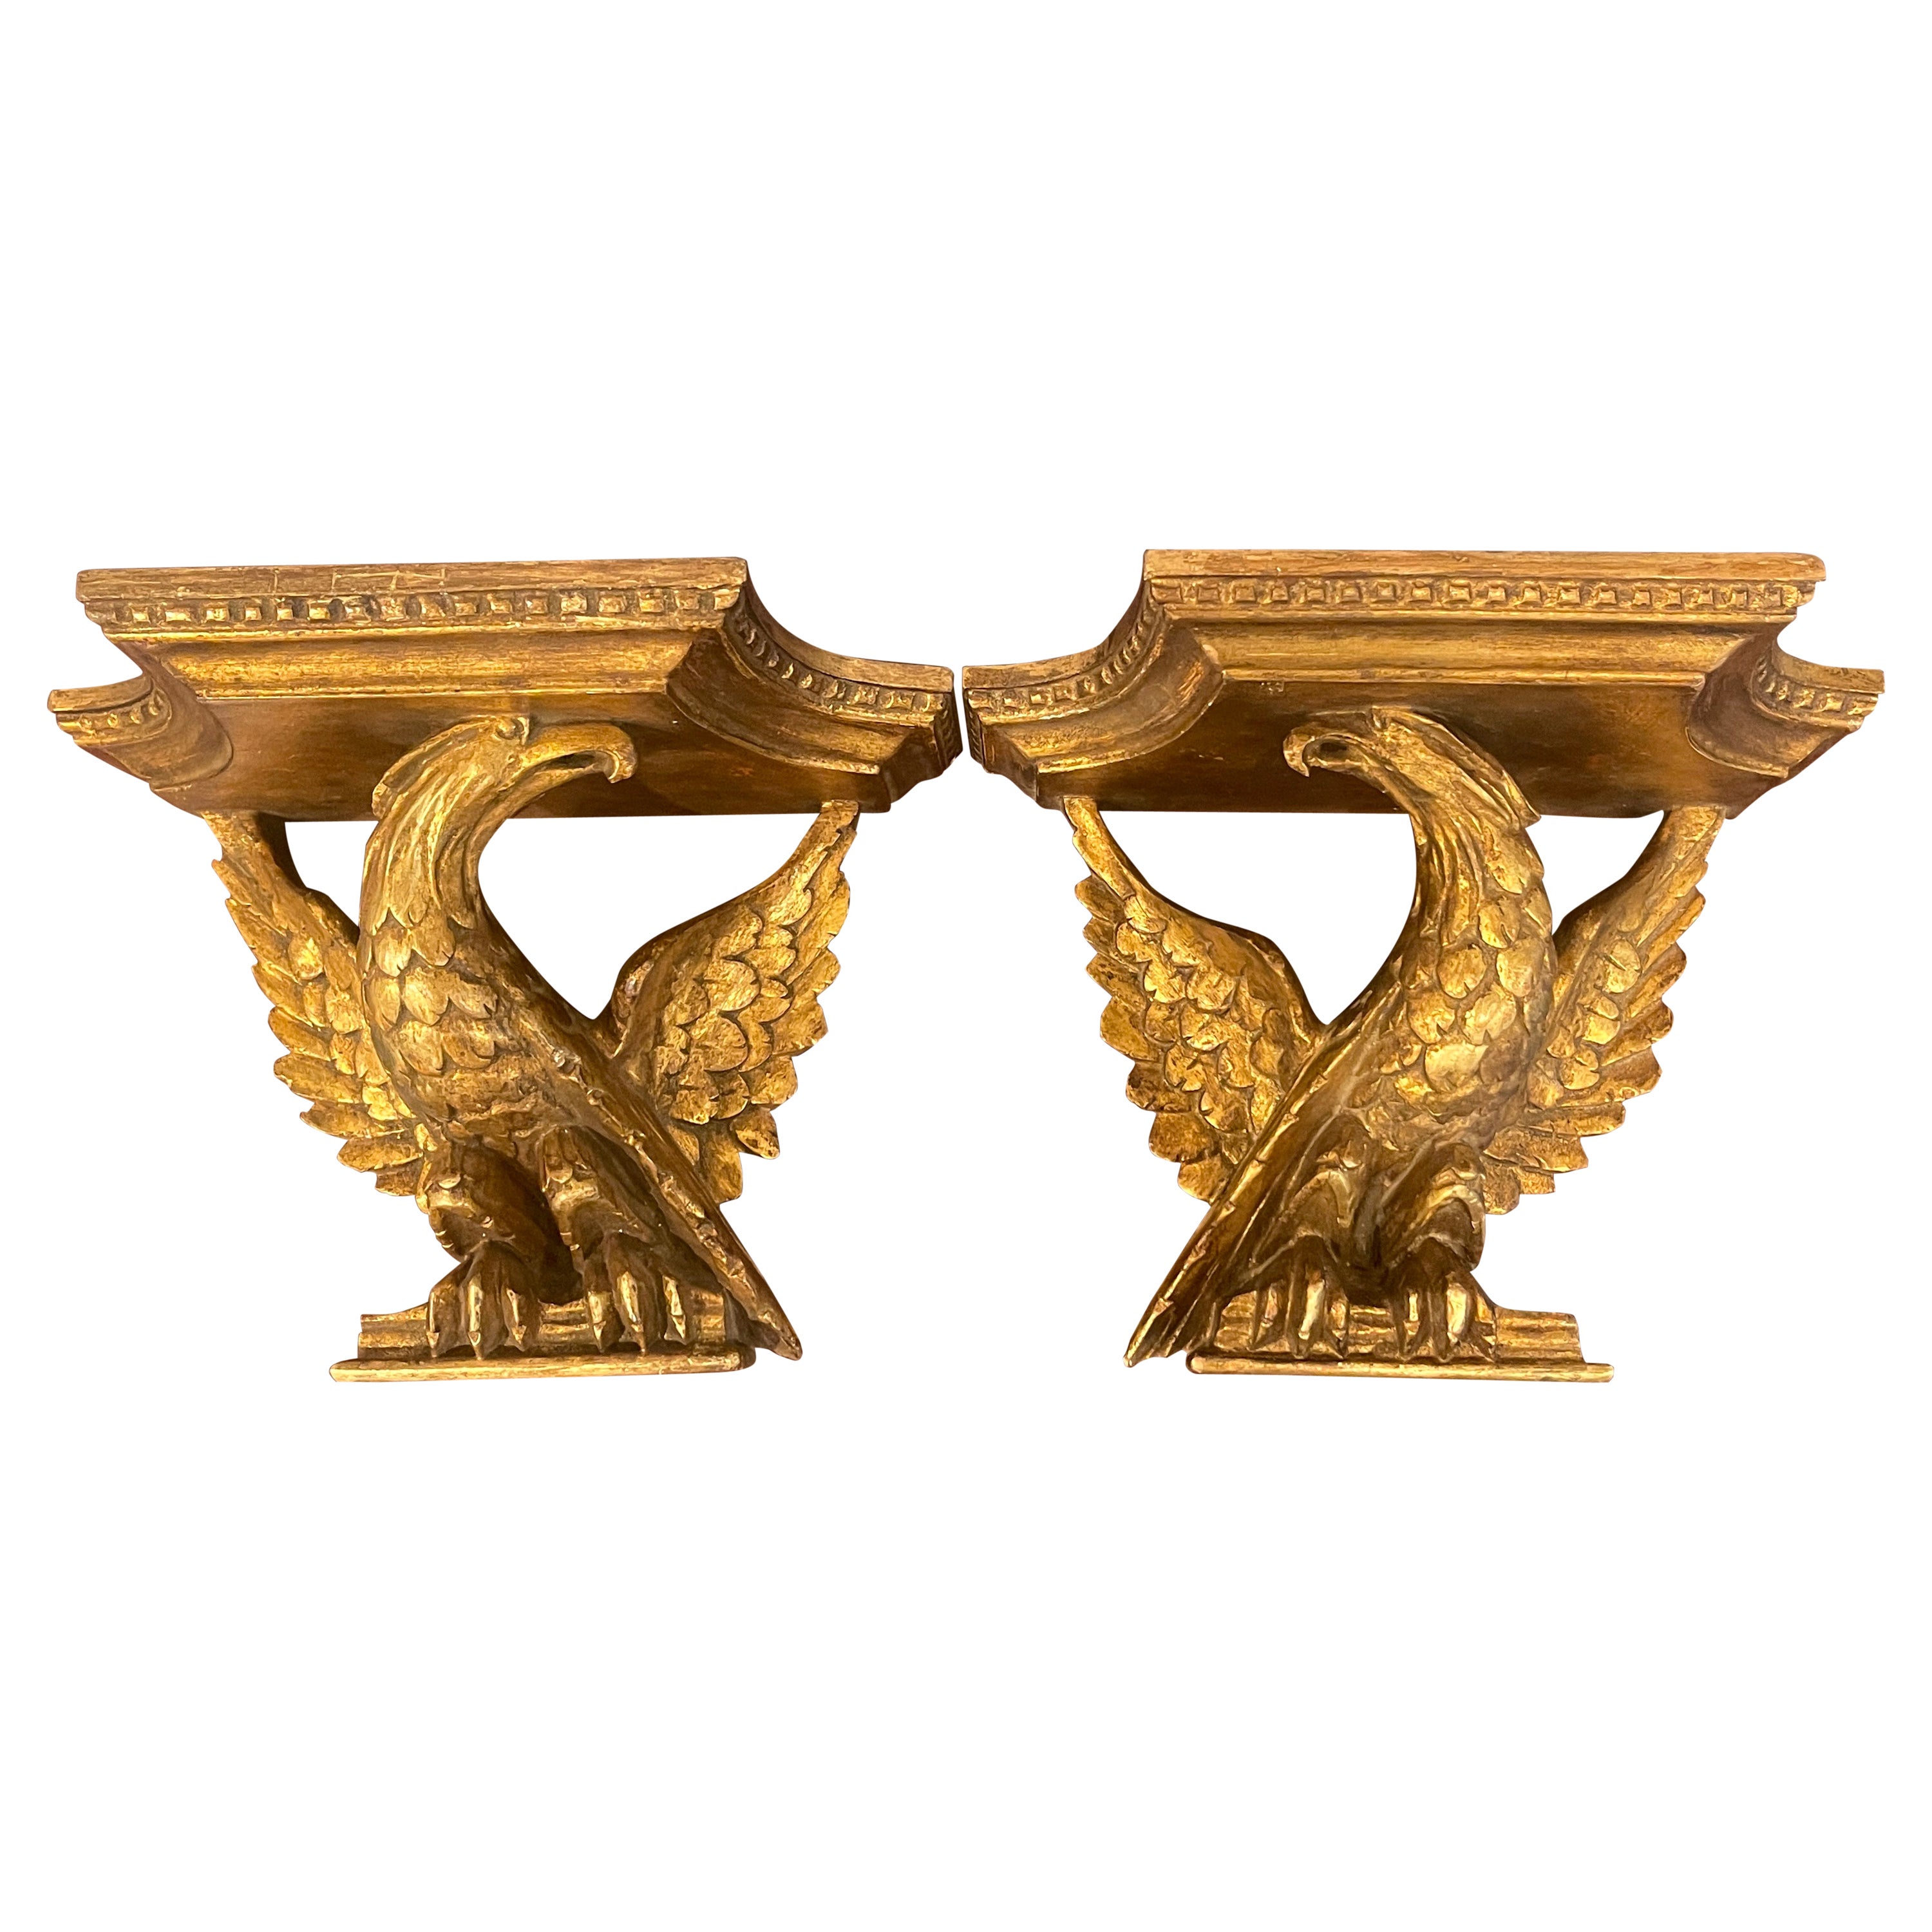 Pair of Italian Neoclassic Carved Giltwood Eagle Motif Wall Shelves